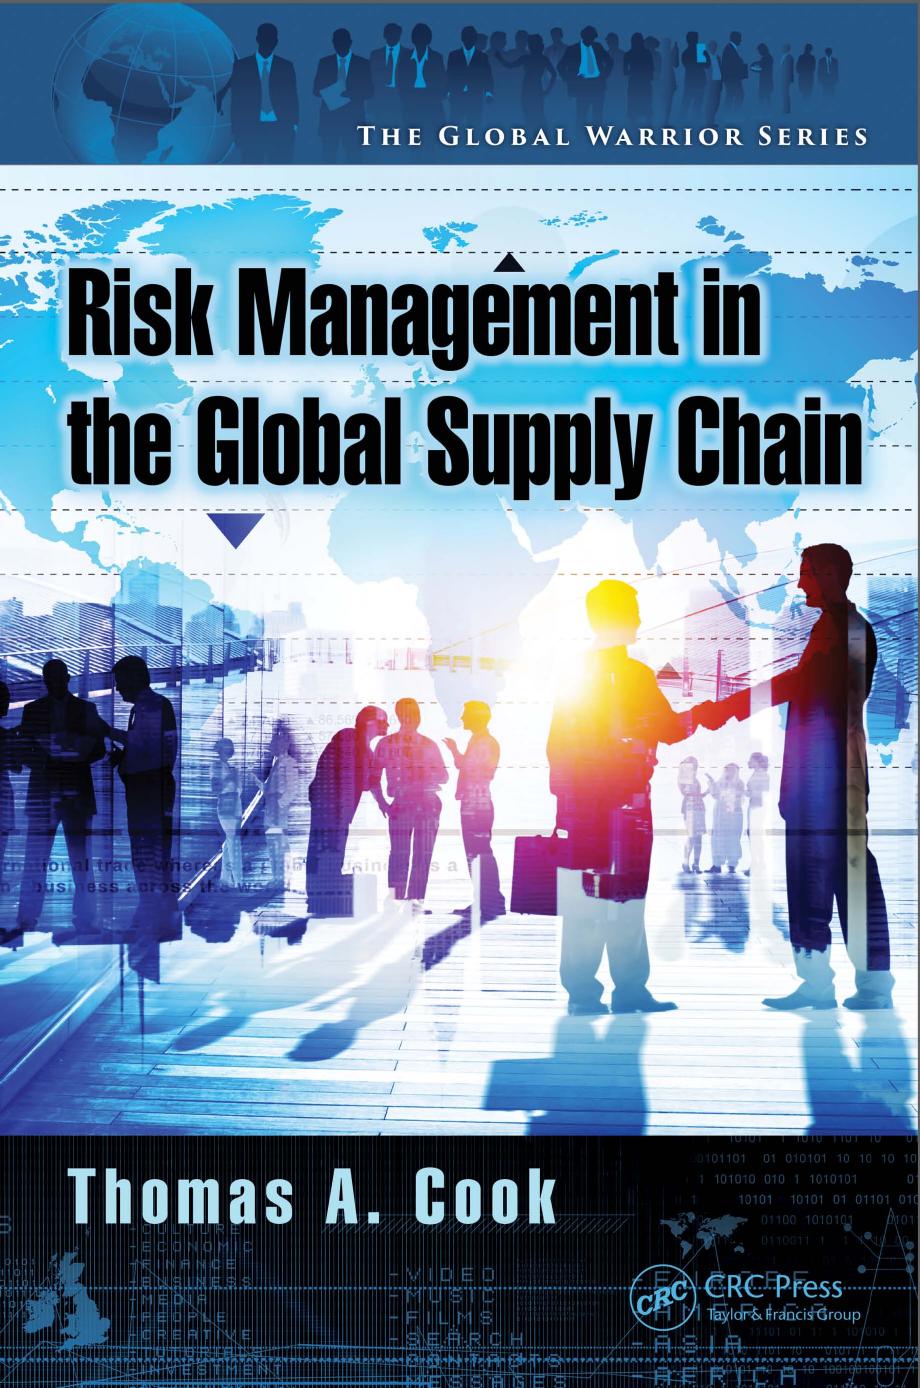 Enterprise Risk Management in the Global Supply Chain